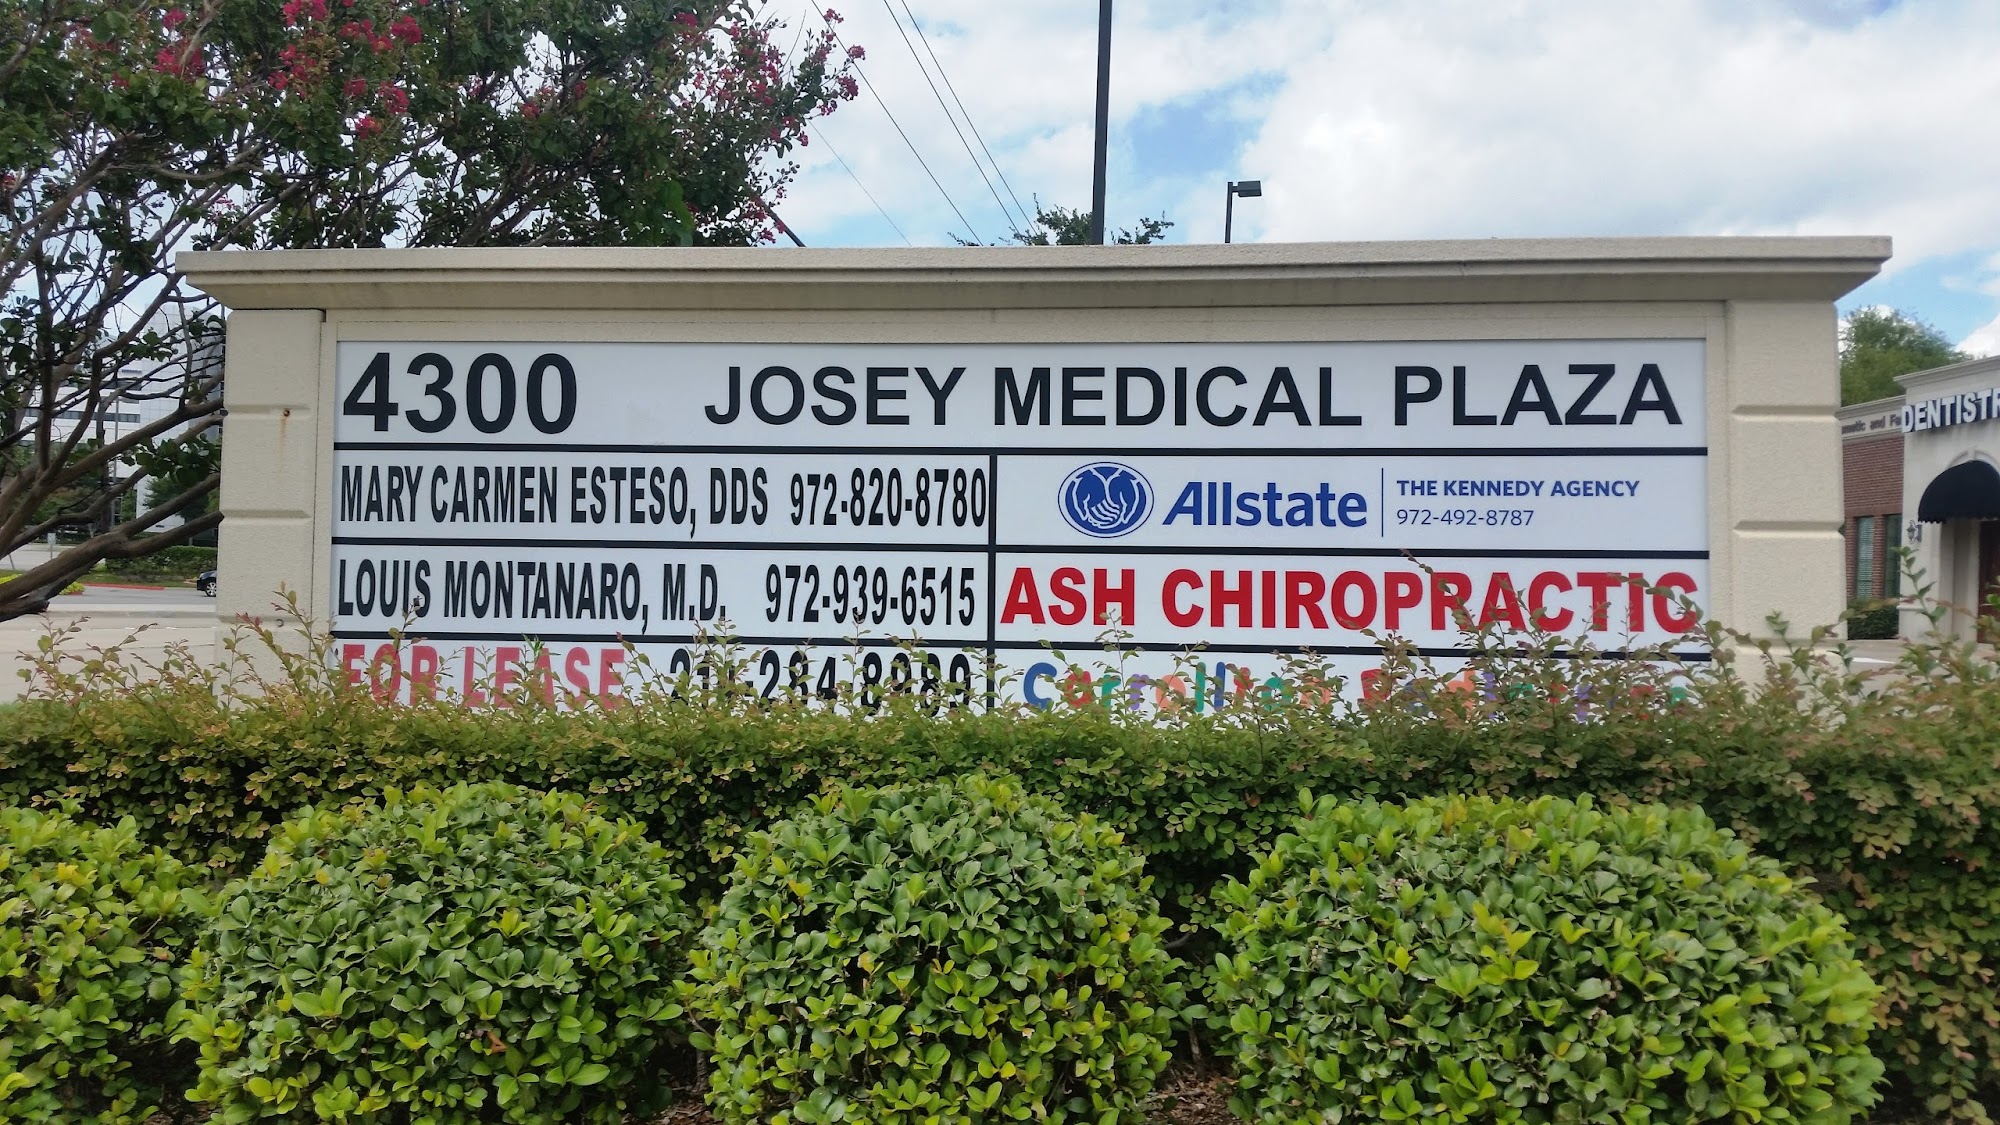 Ash Chiropractic & Acupuncture